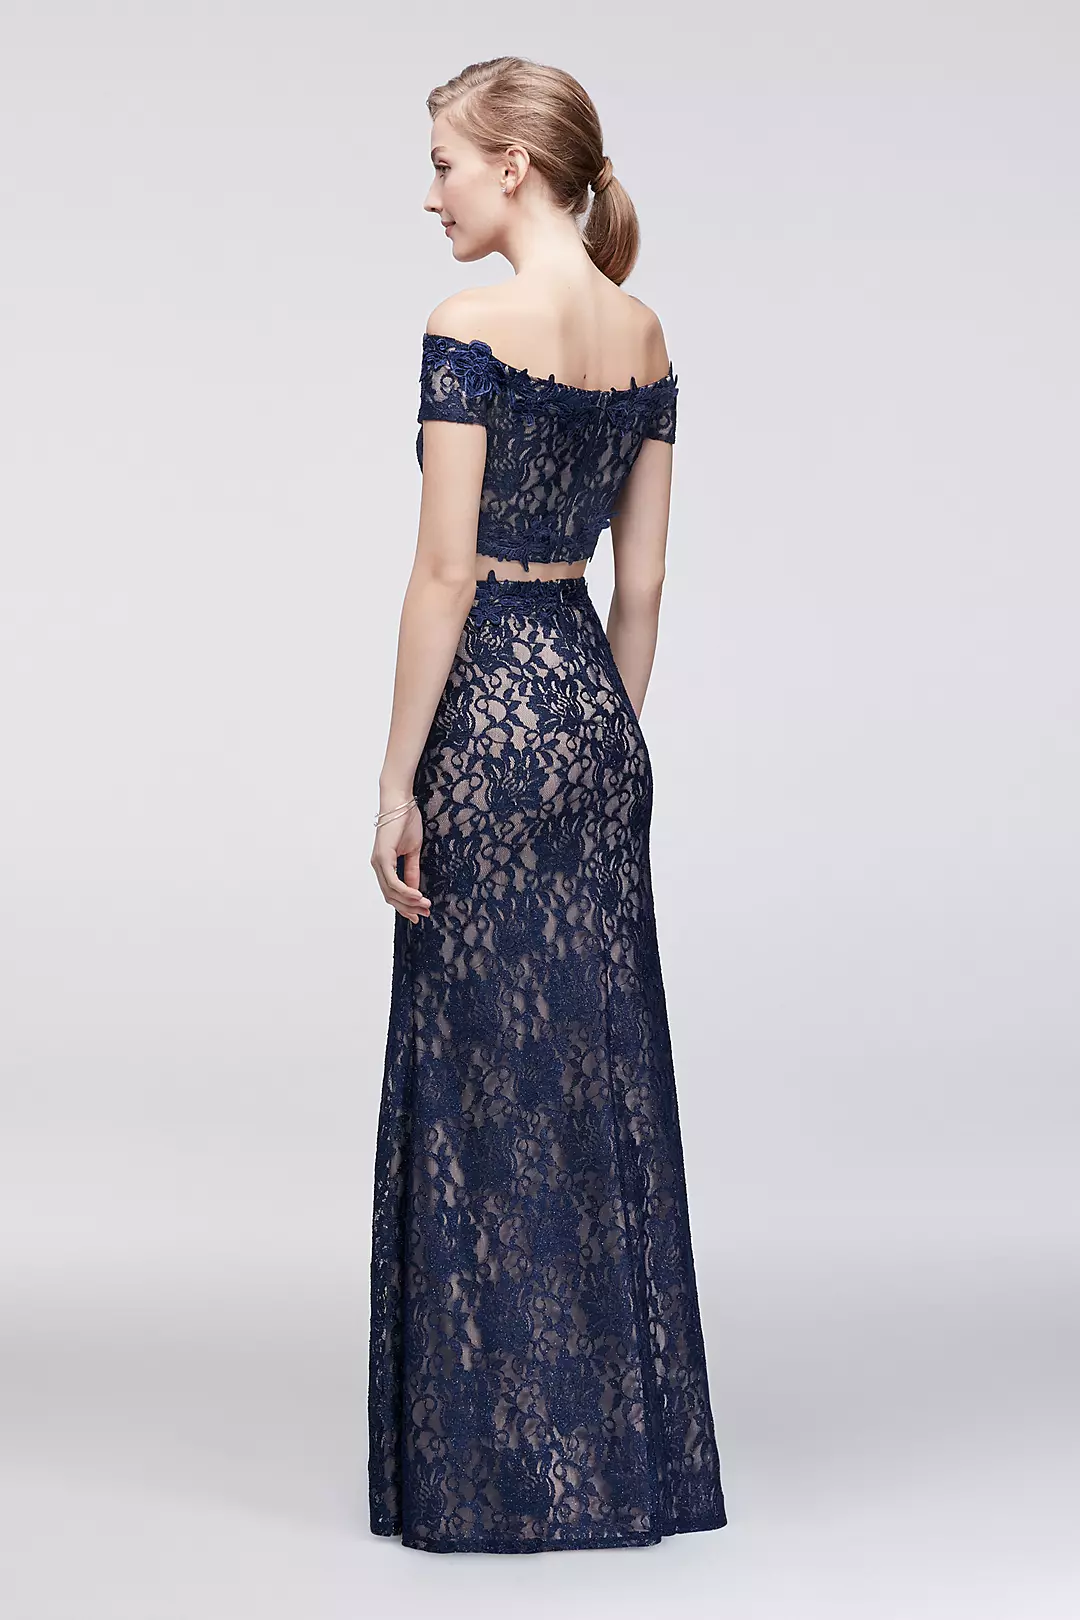 Off-The-Shoulder Lace Two-Piece Dress Image 2